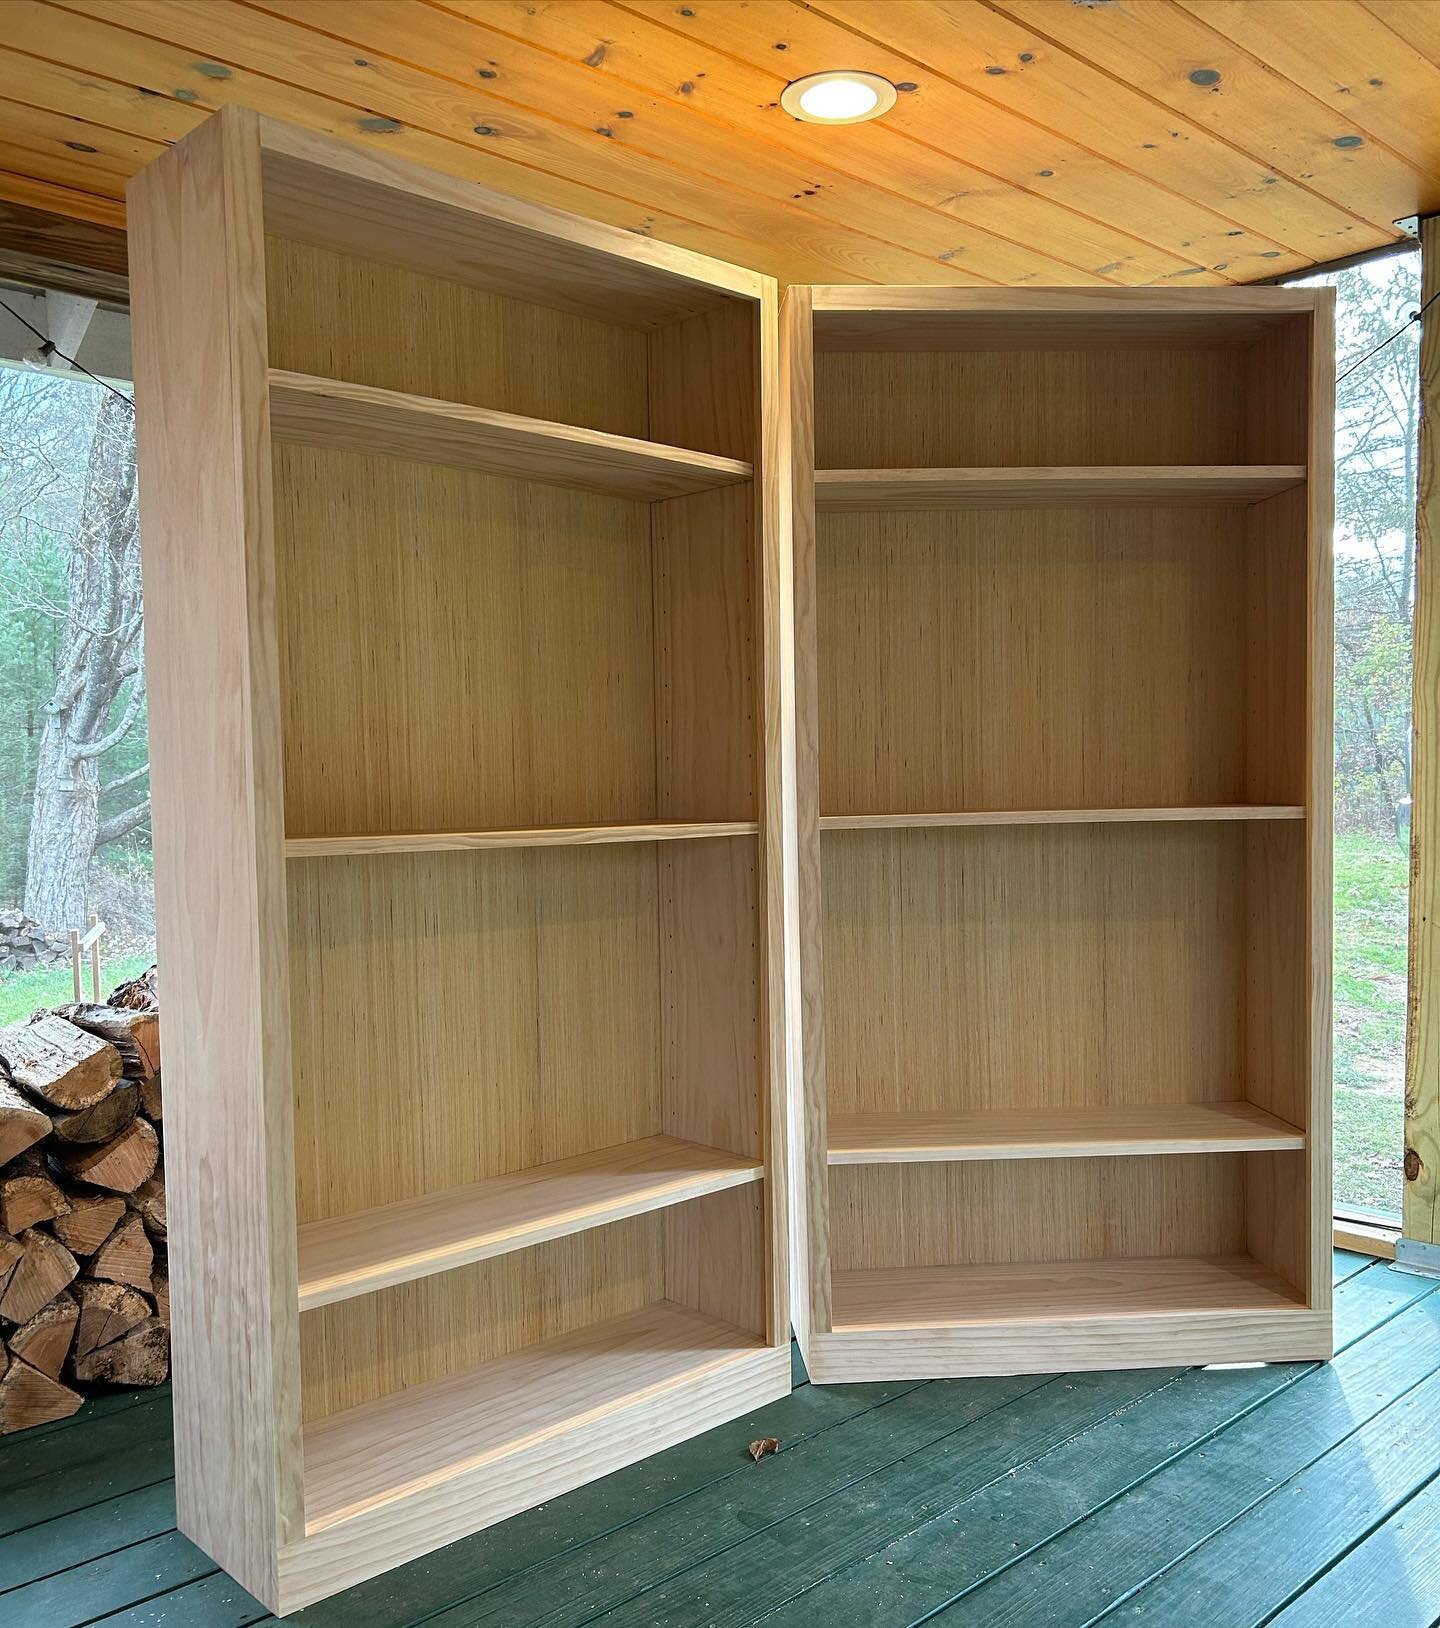 Built &amp; delivered these 2 book shelves (actually going to be Lego shelves) for this customer. Each with adjustable height shelves, and built with solid wood. These will for sure outlast store bought shelves!